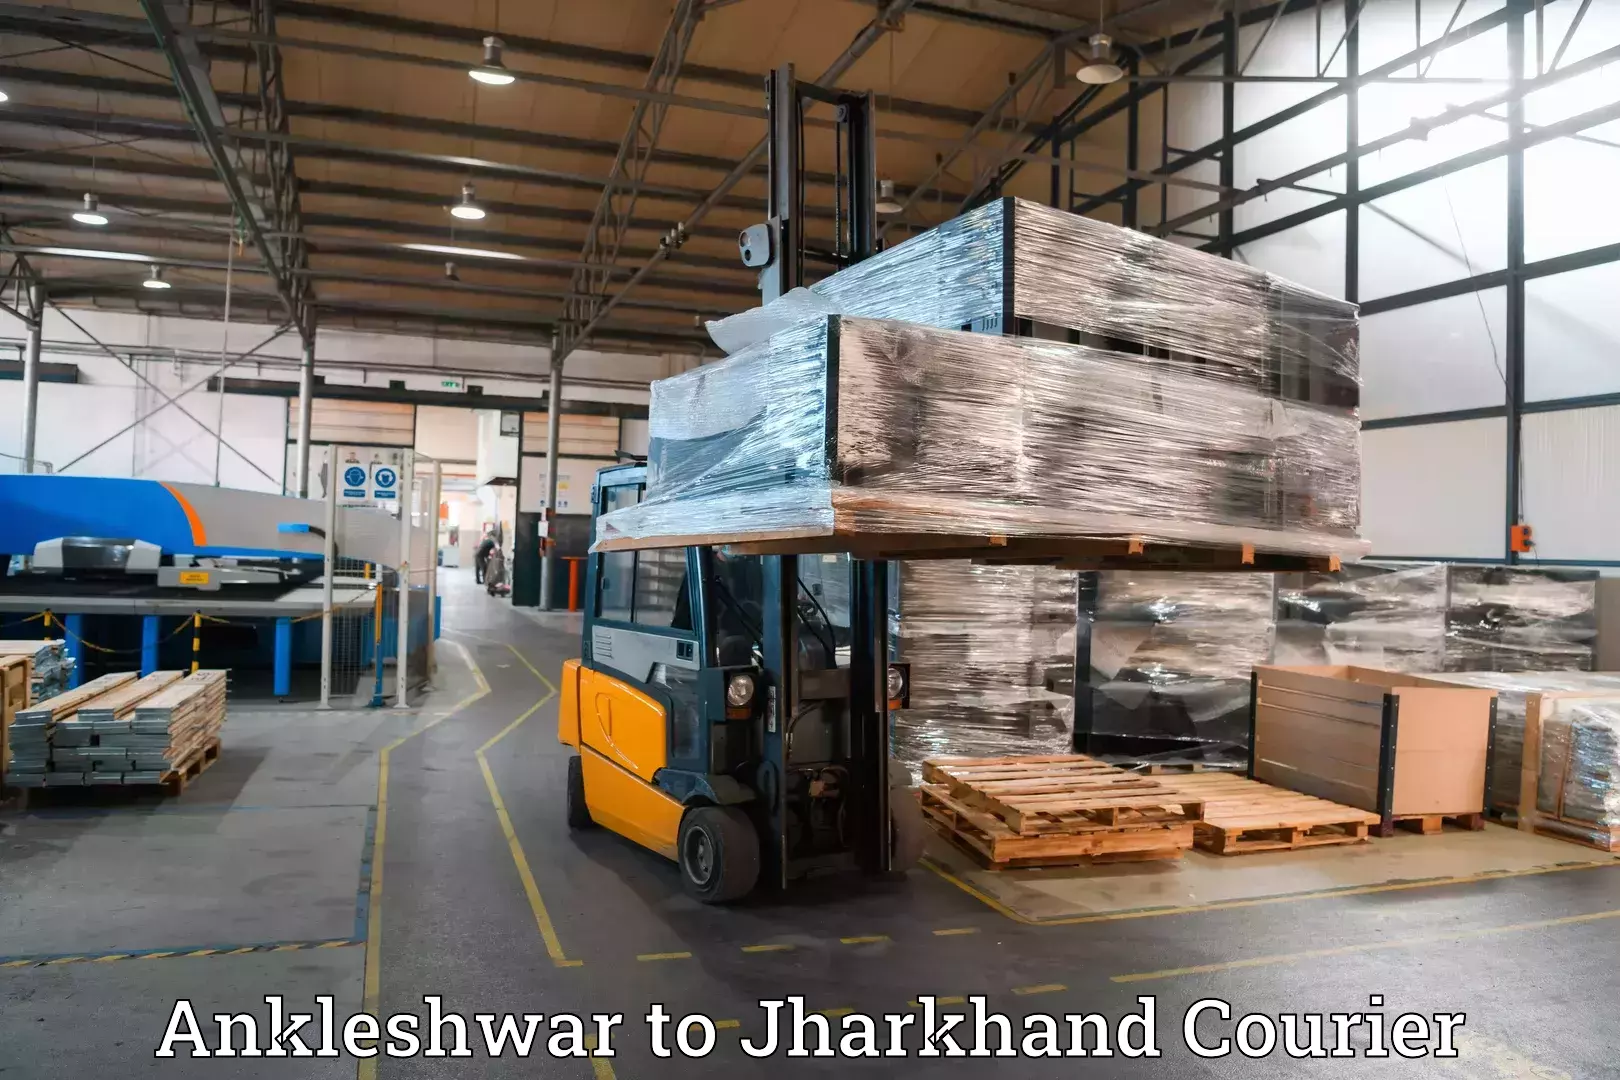 Luggage transport consultancy Ankleshwar to Jharkhand